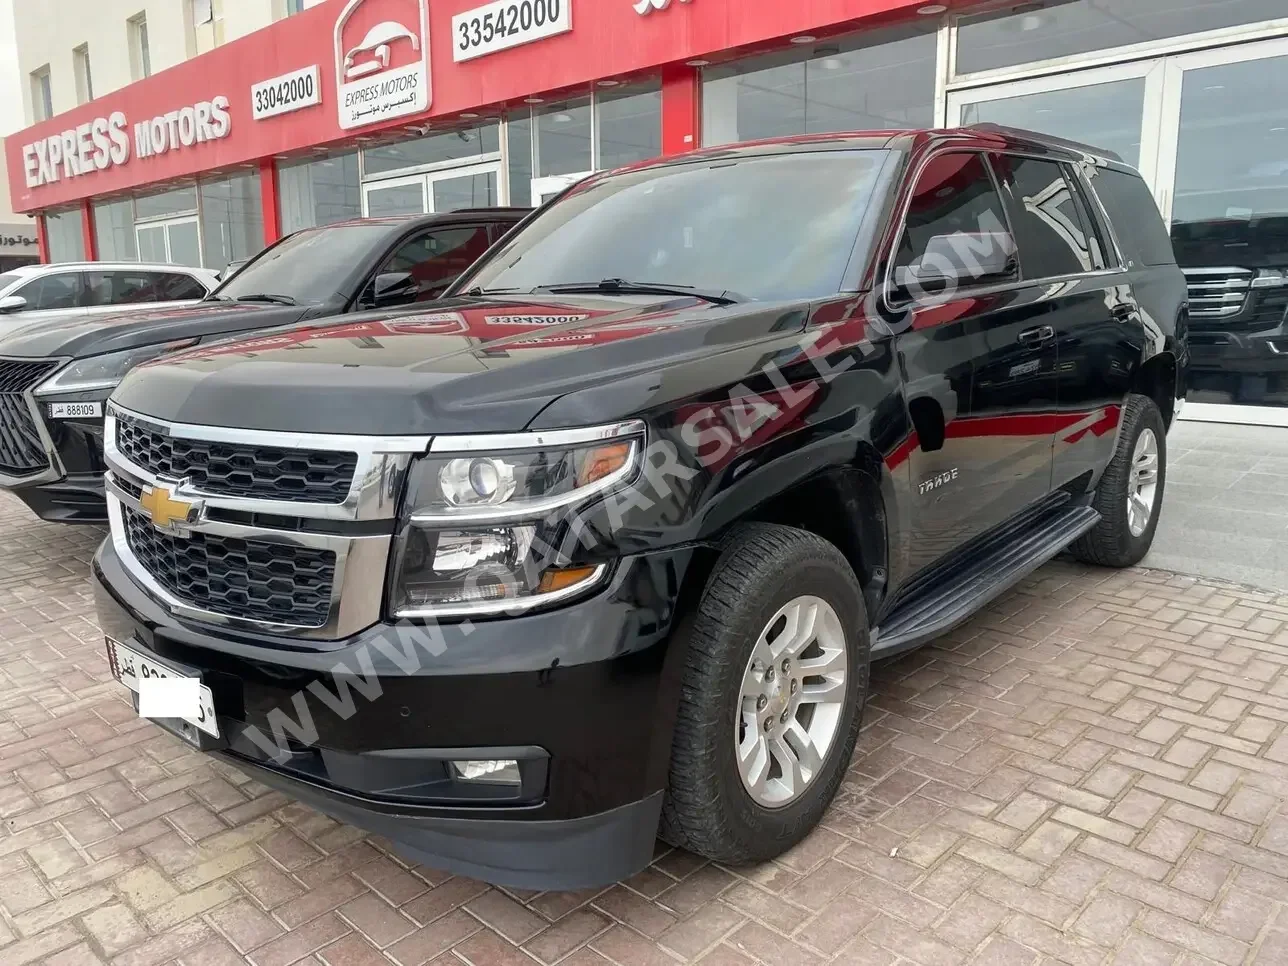 Chevrolet  Tahoe  LT  2015  Automatic  177,000 Km  8 Cylinder  Four Wheel Drive (4WD)  SUV  Black